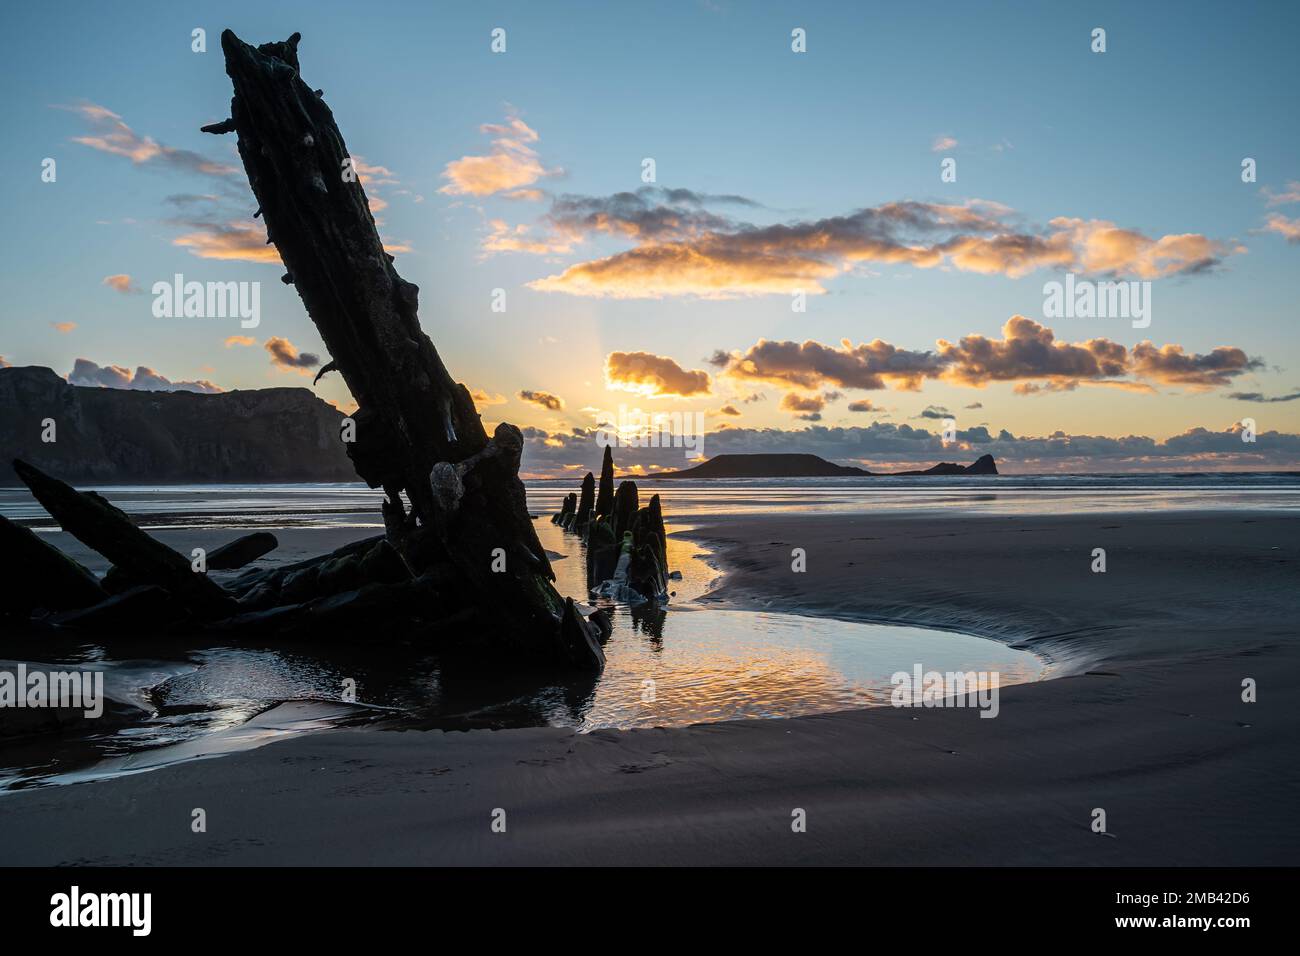 Wreck of the Helvetia, shipwreck on Rhossili beach at sunset, no people. Gower Peninsula, South Wales, the United Kingdom, UK GB. Stock Photo